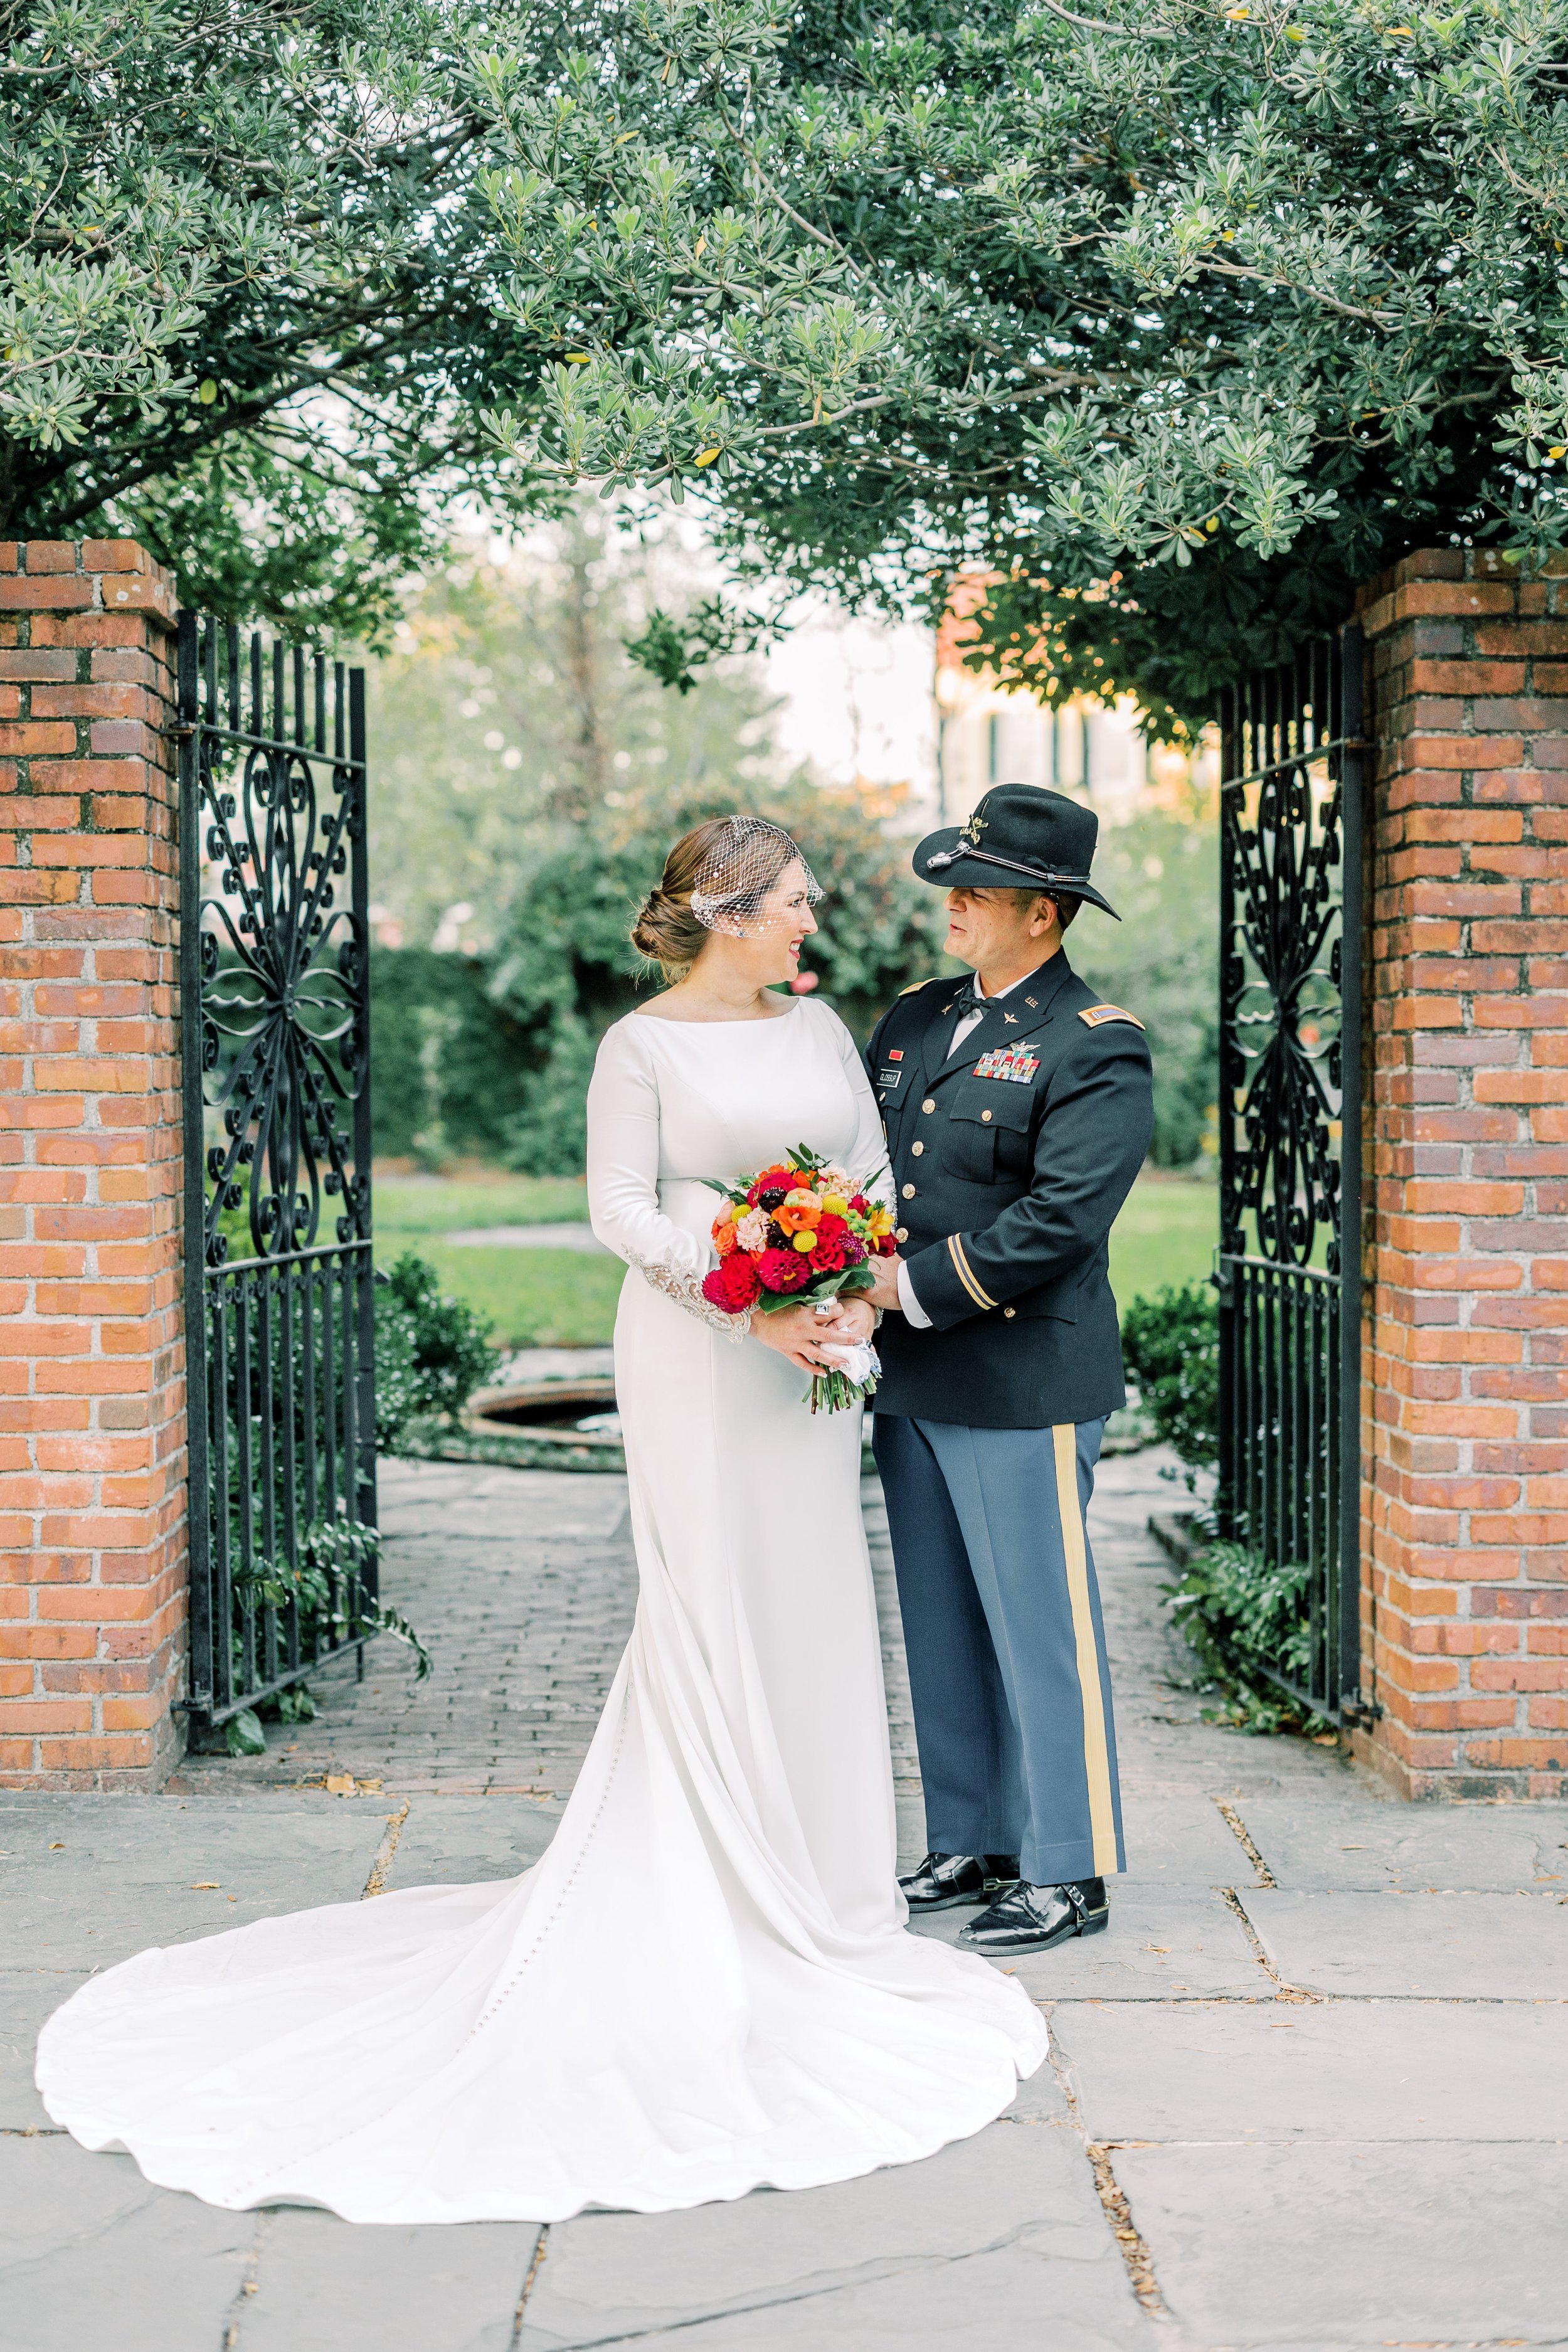 ivory-and-beau-blog-wedding-blog-real-bride-aston-by-sottero-and-midgley-maggie-sottero-wedding-dress-savannah-wedding-savannah-bride-savannah-bridal-shop-davenport-house-wedding-Rachel Linder Photography_Savannah Wedding Photographer-250.jpg